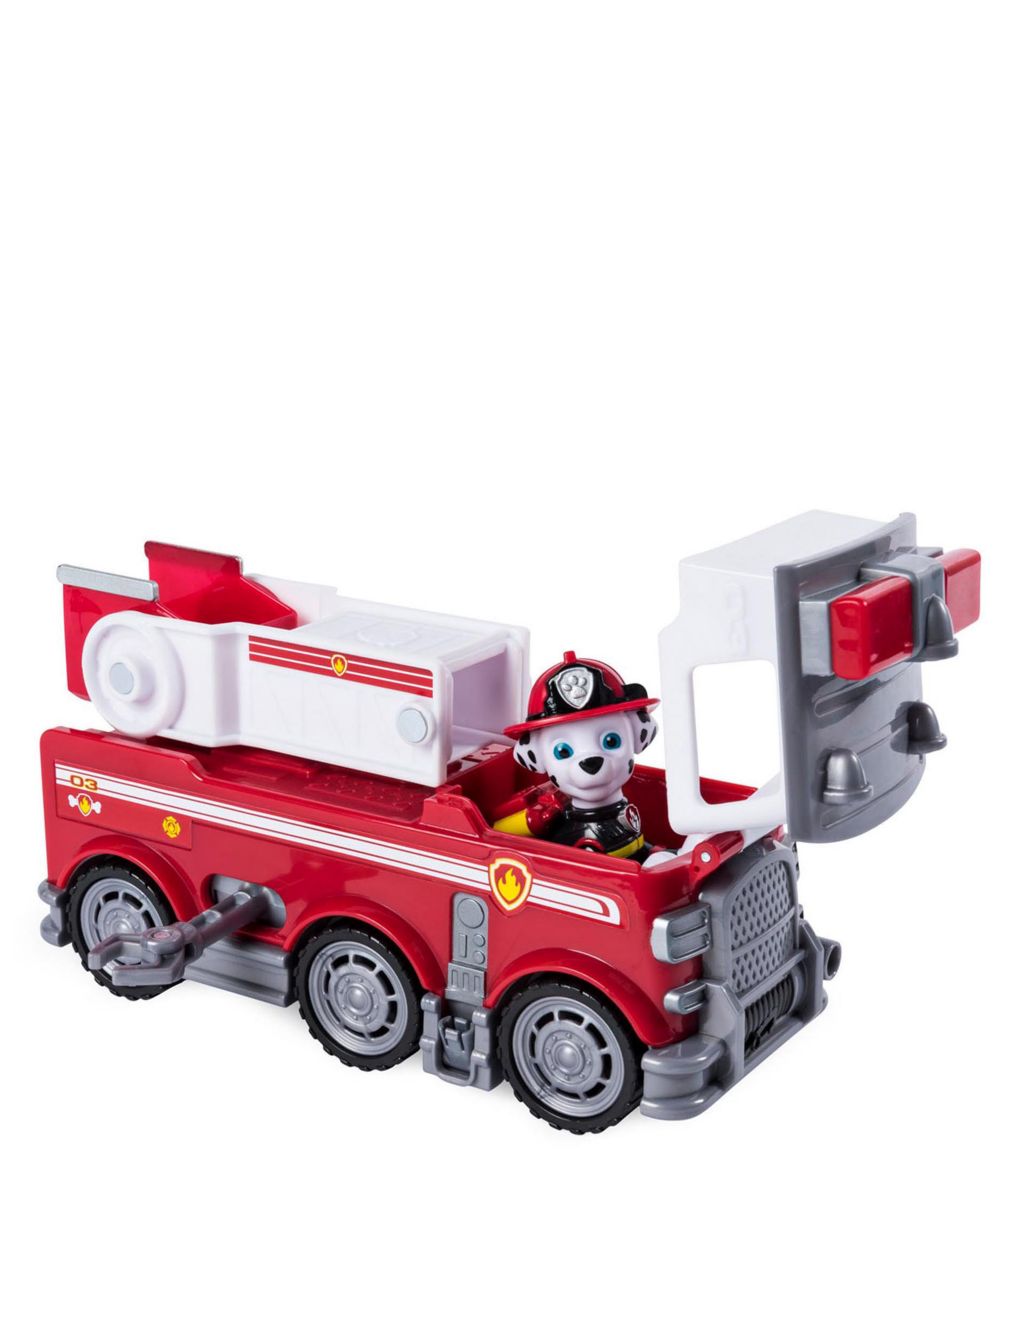 Rescue Fire Truck (3+ Yrs) image 3